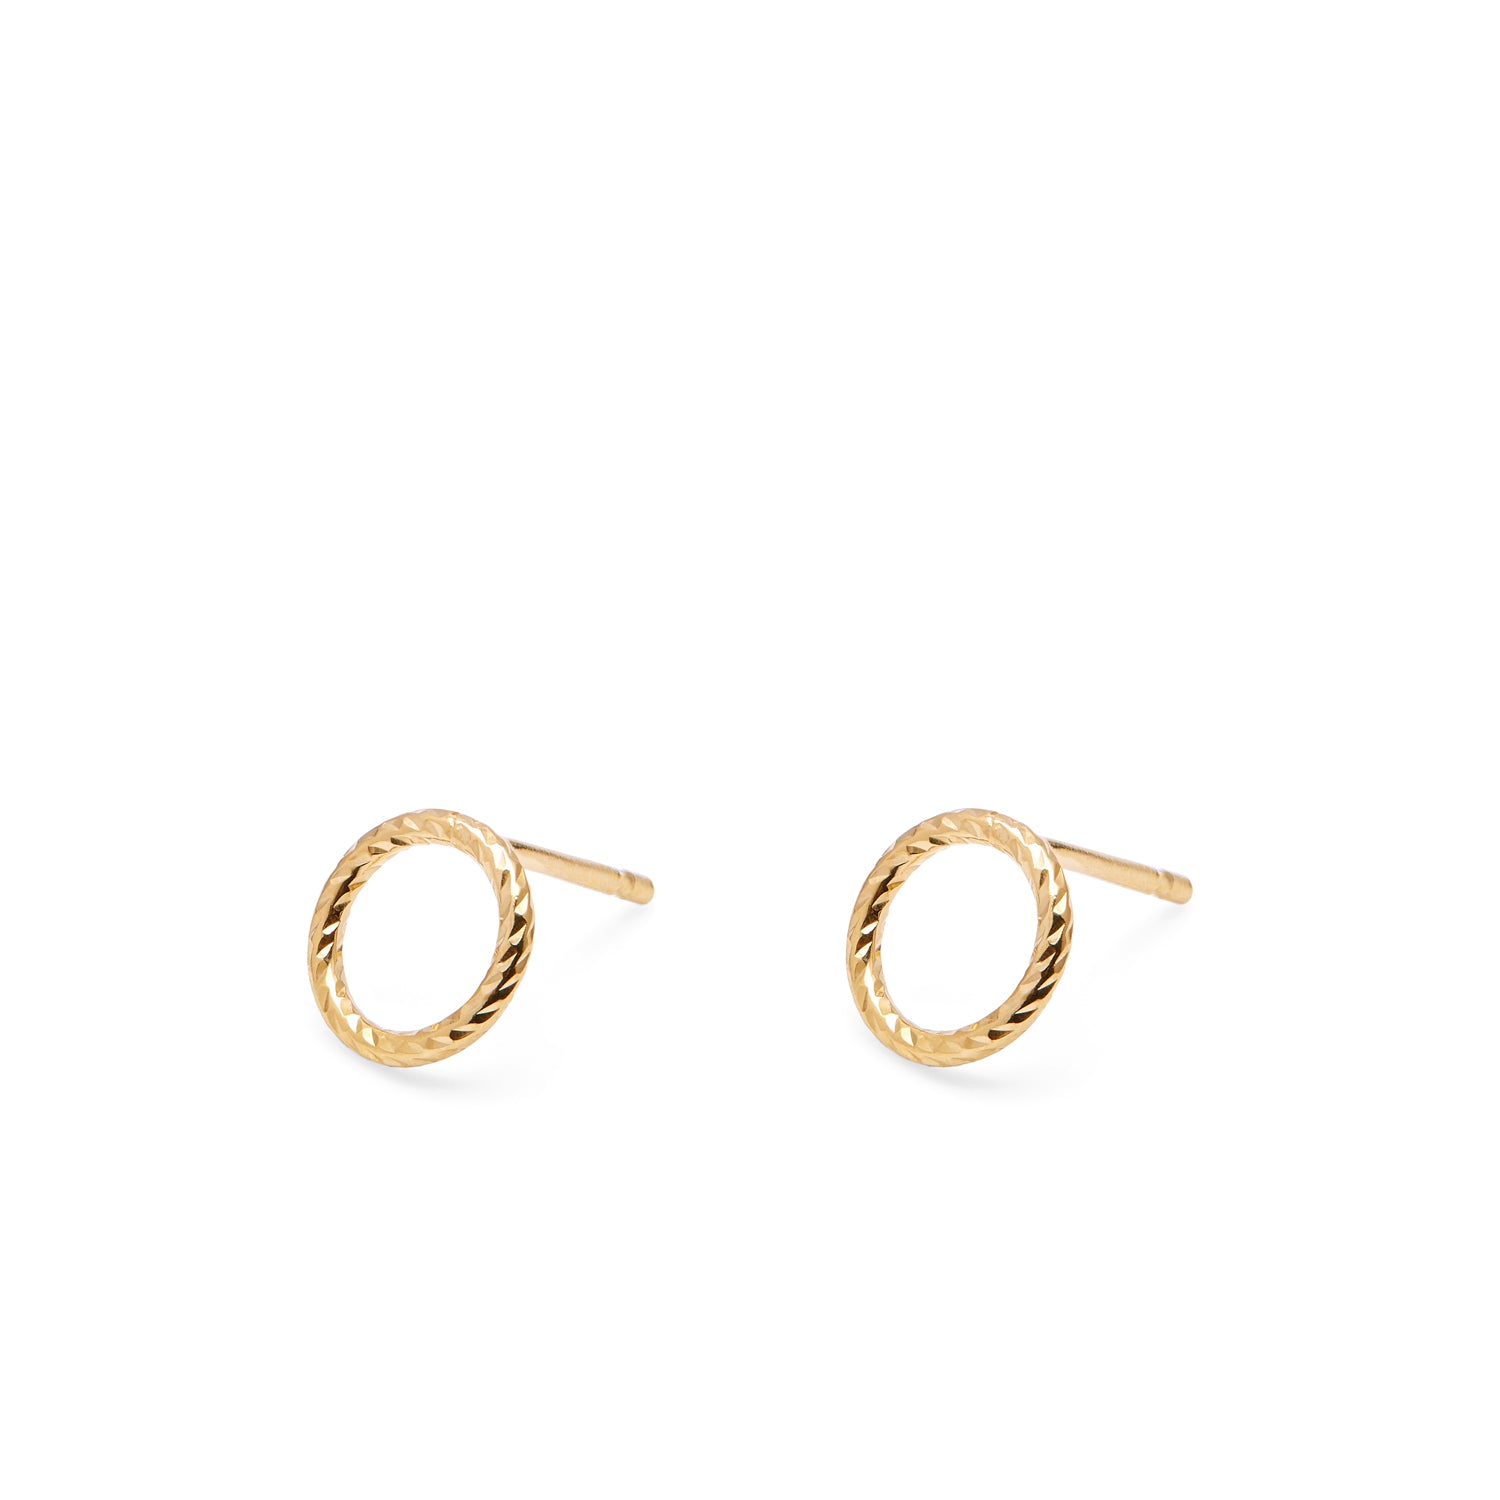 Faceted Circle Stud Earrings - Gold - Myia Bonner Jewellery